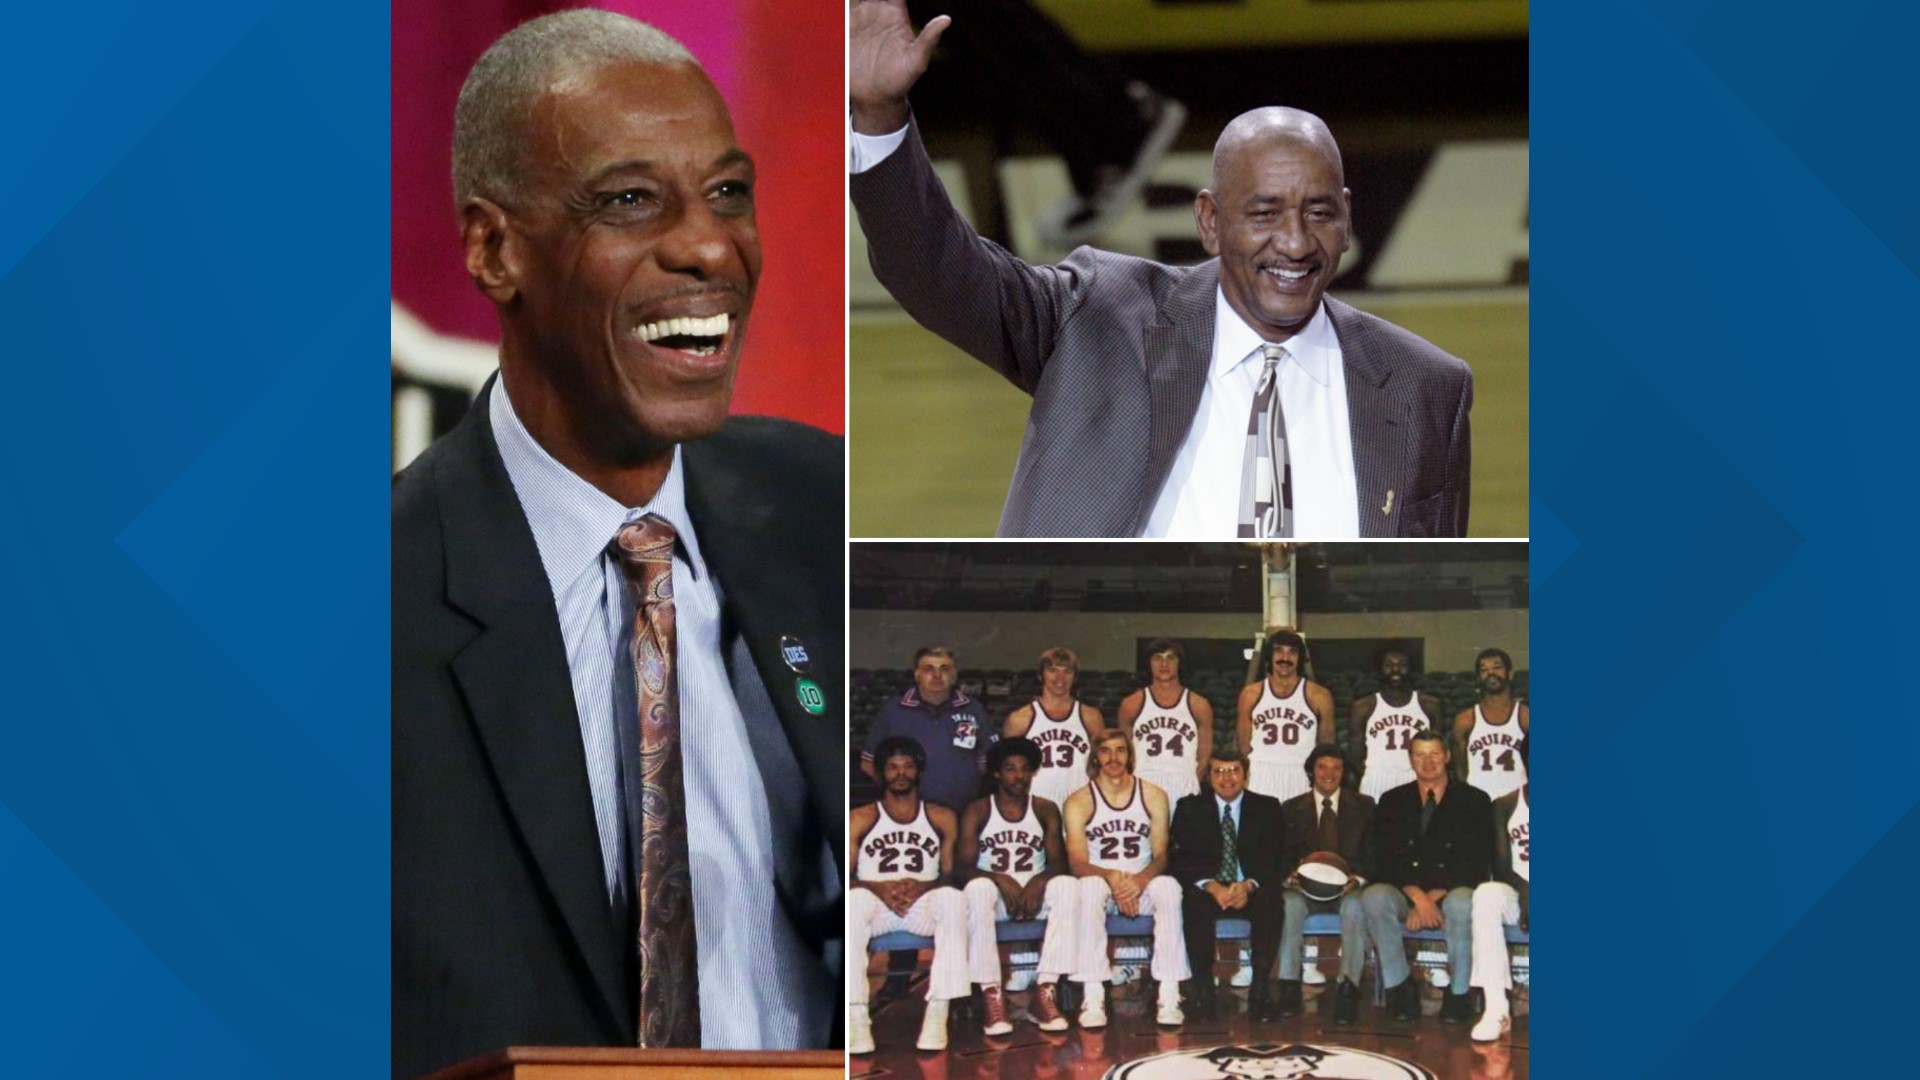 Among those who are expected to be in attendance in Portsmouth on Friday are Basketball Hall of Famers Charlie Scott, George Gervin and Julius Erving.